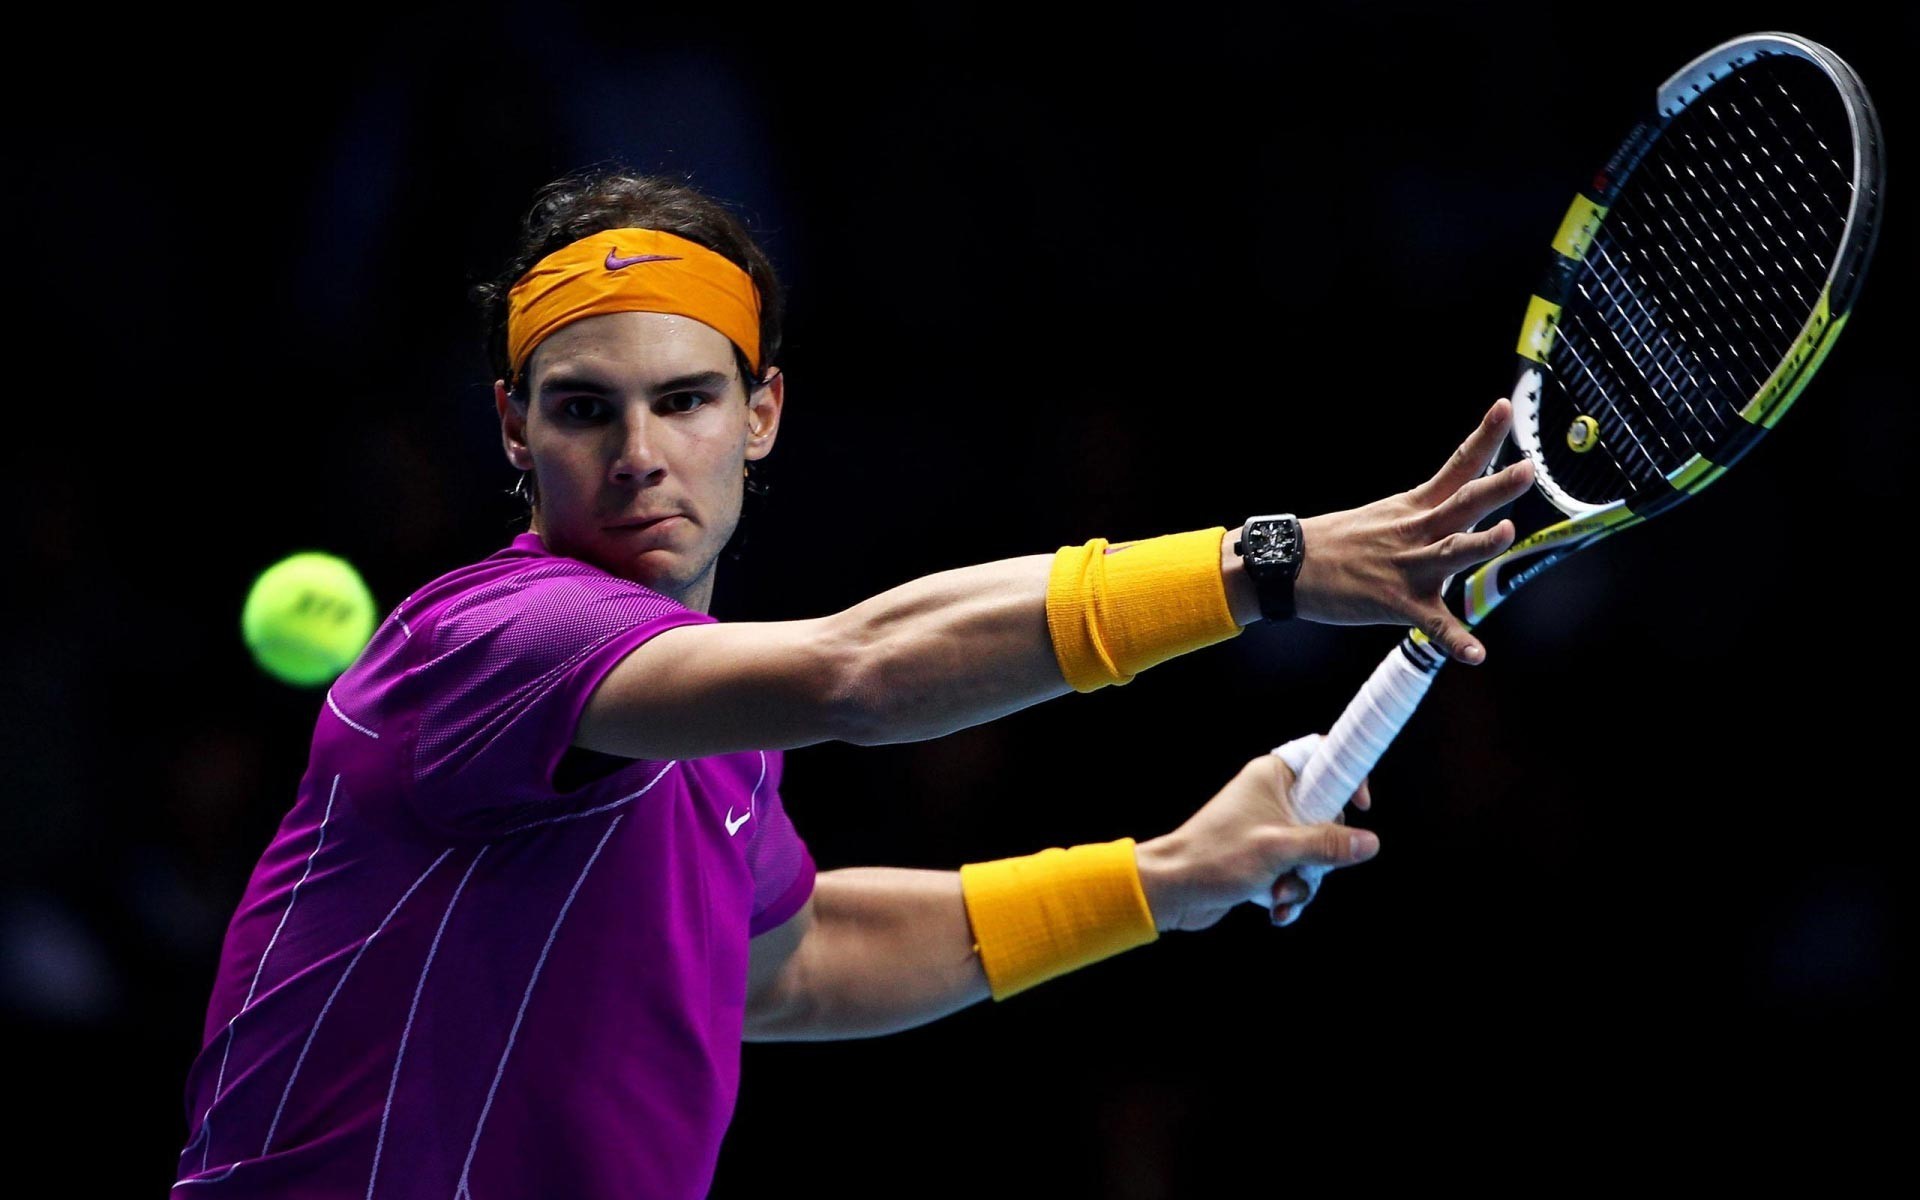 Tennis today 22.07. Schedule, Predictions & Betting Tips